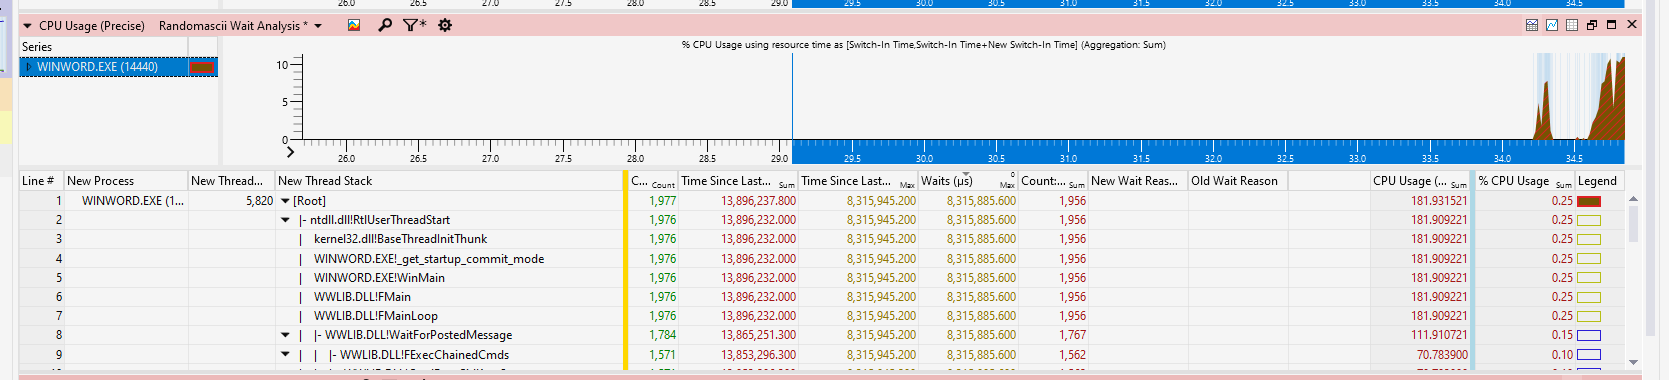 Windows Performance Analyzer's CPU Usage (Precise) view.

We are drilling down the stack for WINWORD.EXE -- showing ntdll.dll!RthUserThreadStart, WINWORD.EXE and later WWLIB.DLL in WaitForPostedMessage. The Waits column shows roughly 8 million microseconds.